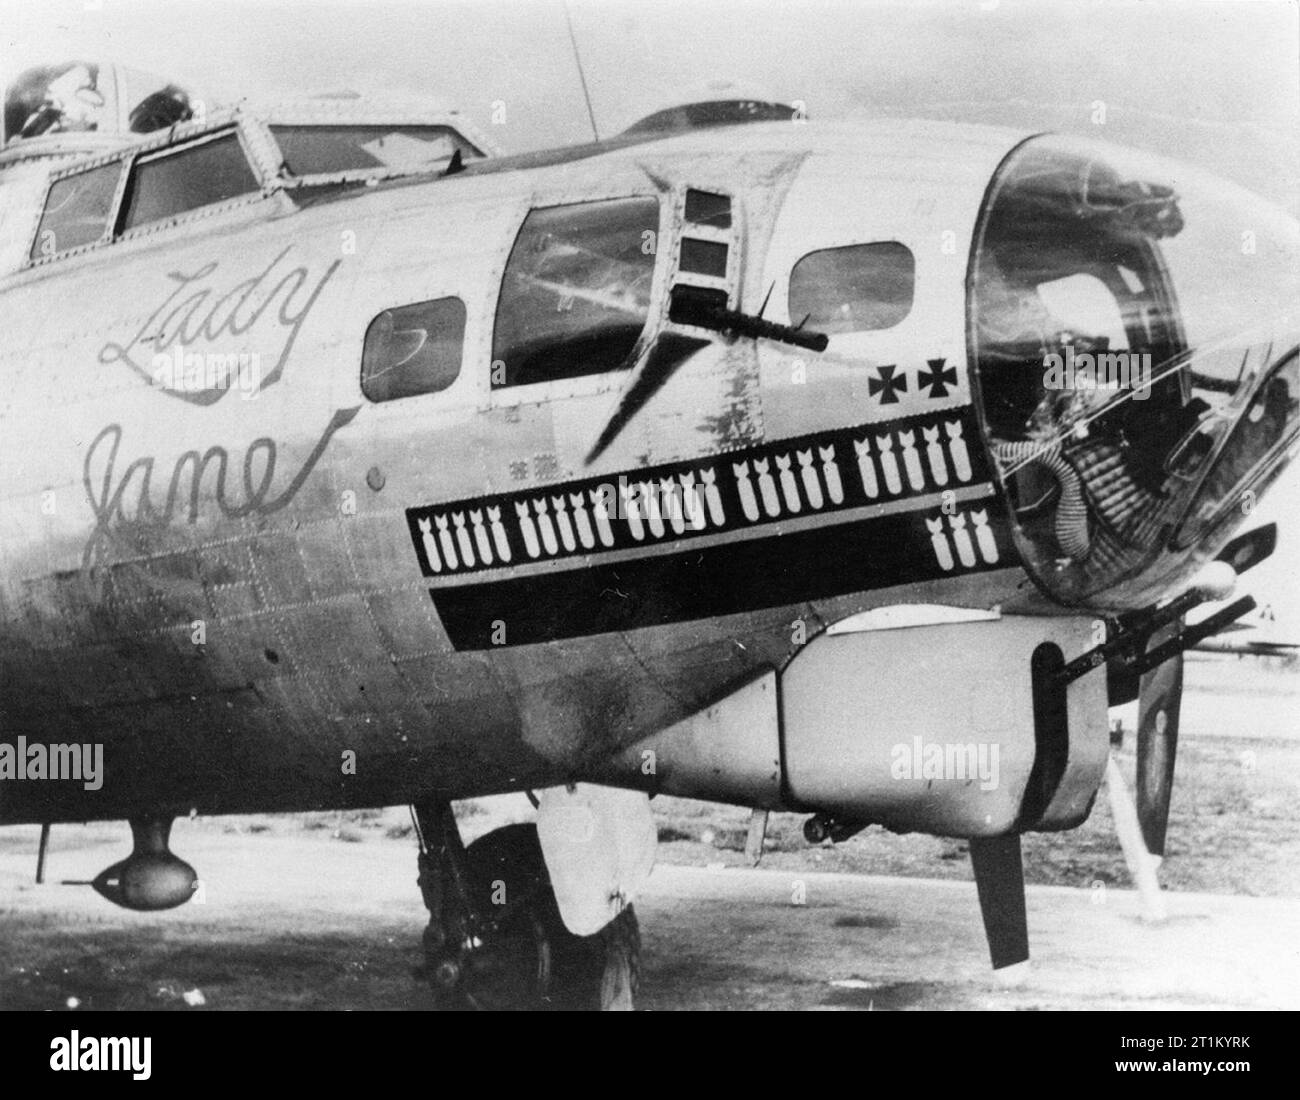 The nose art of a B-17 Flying Fortress nicknamed 'Lady Jane' of the 401st Bomb Group. Stock Photo